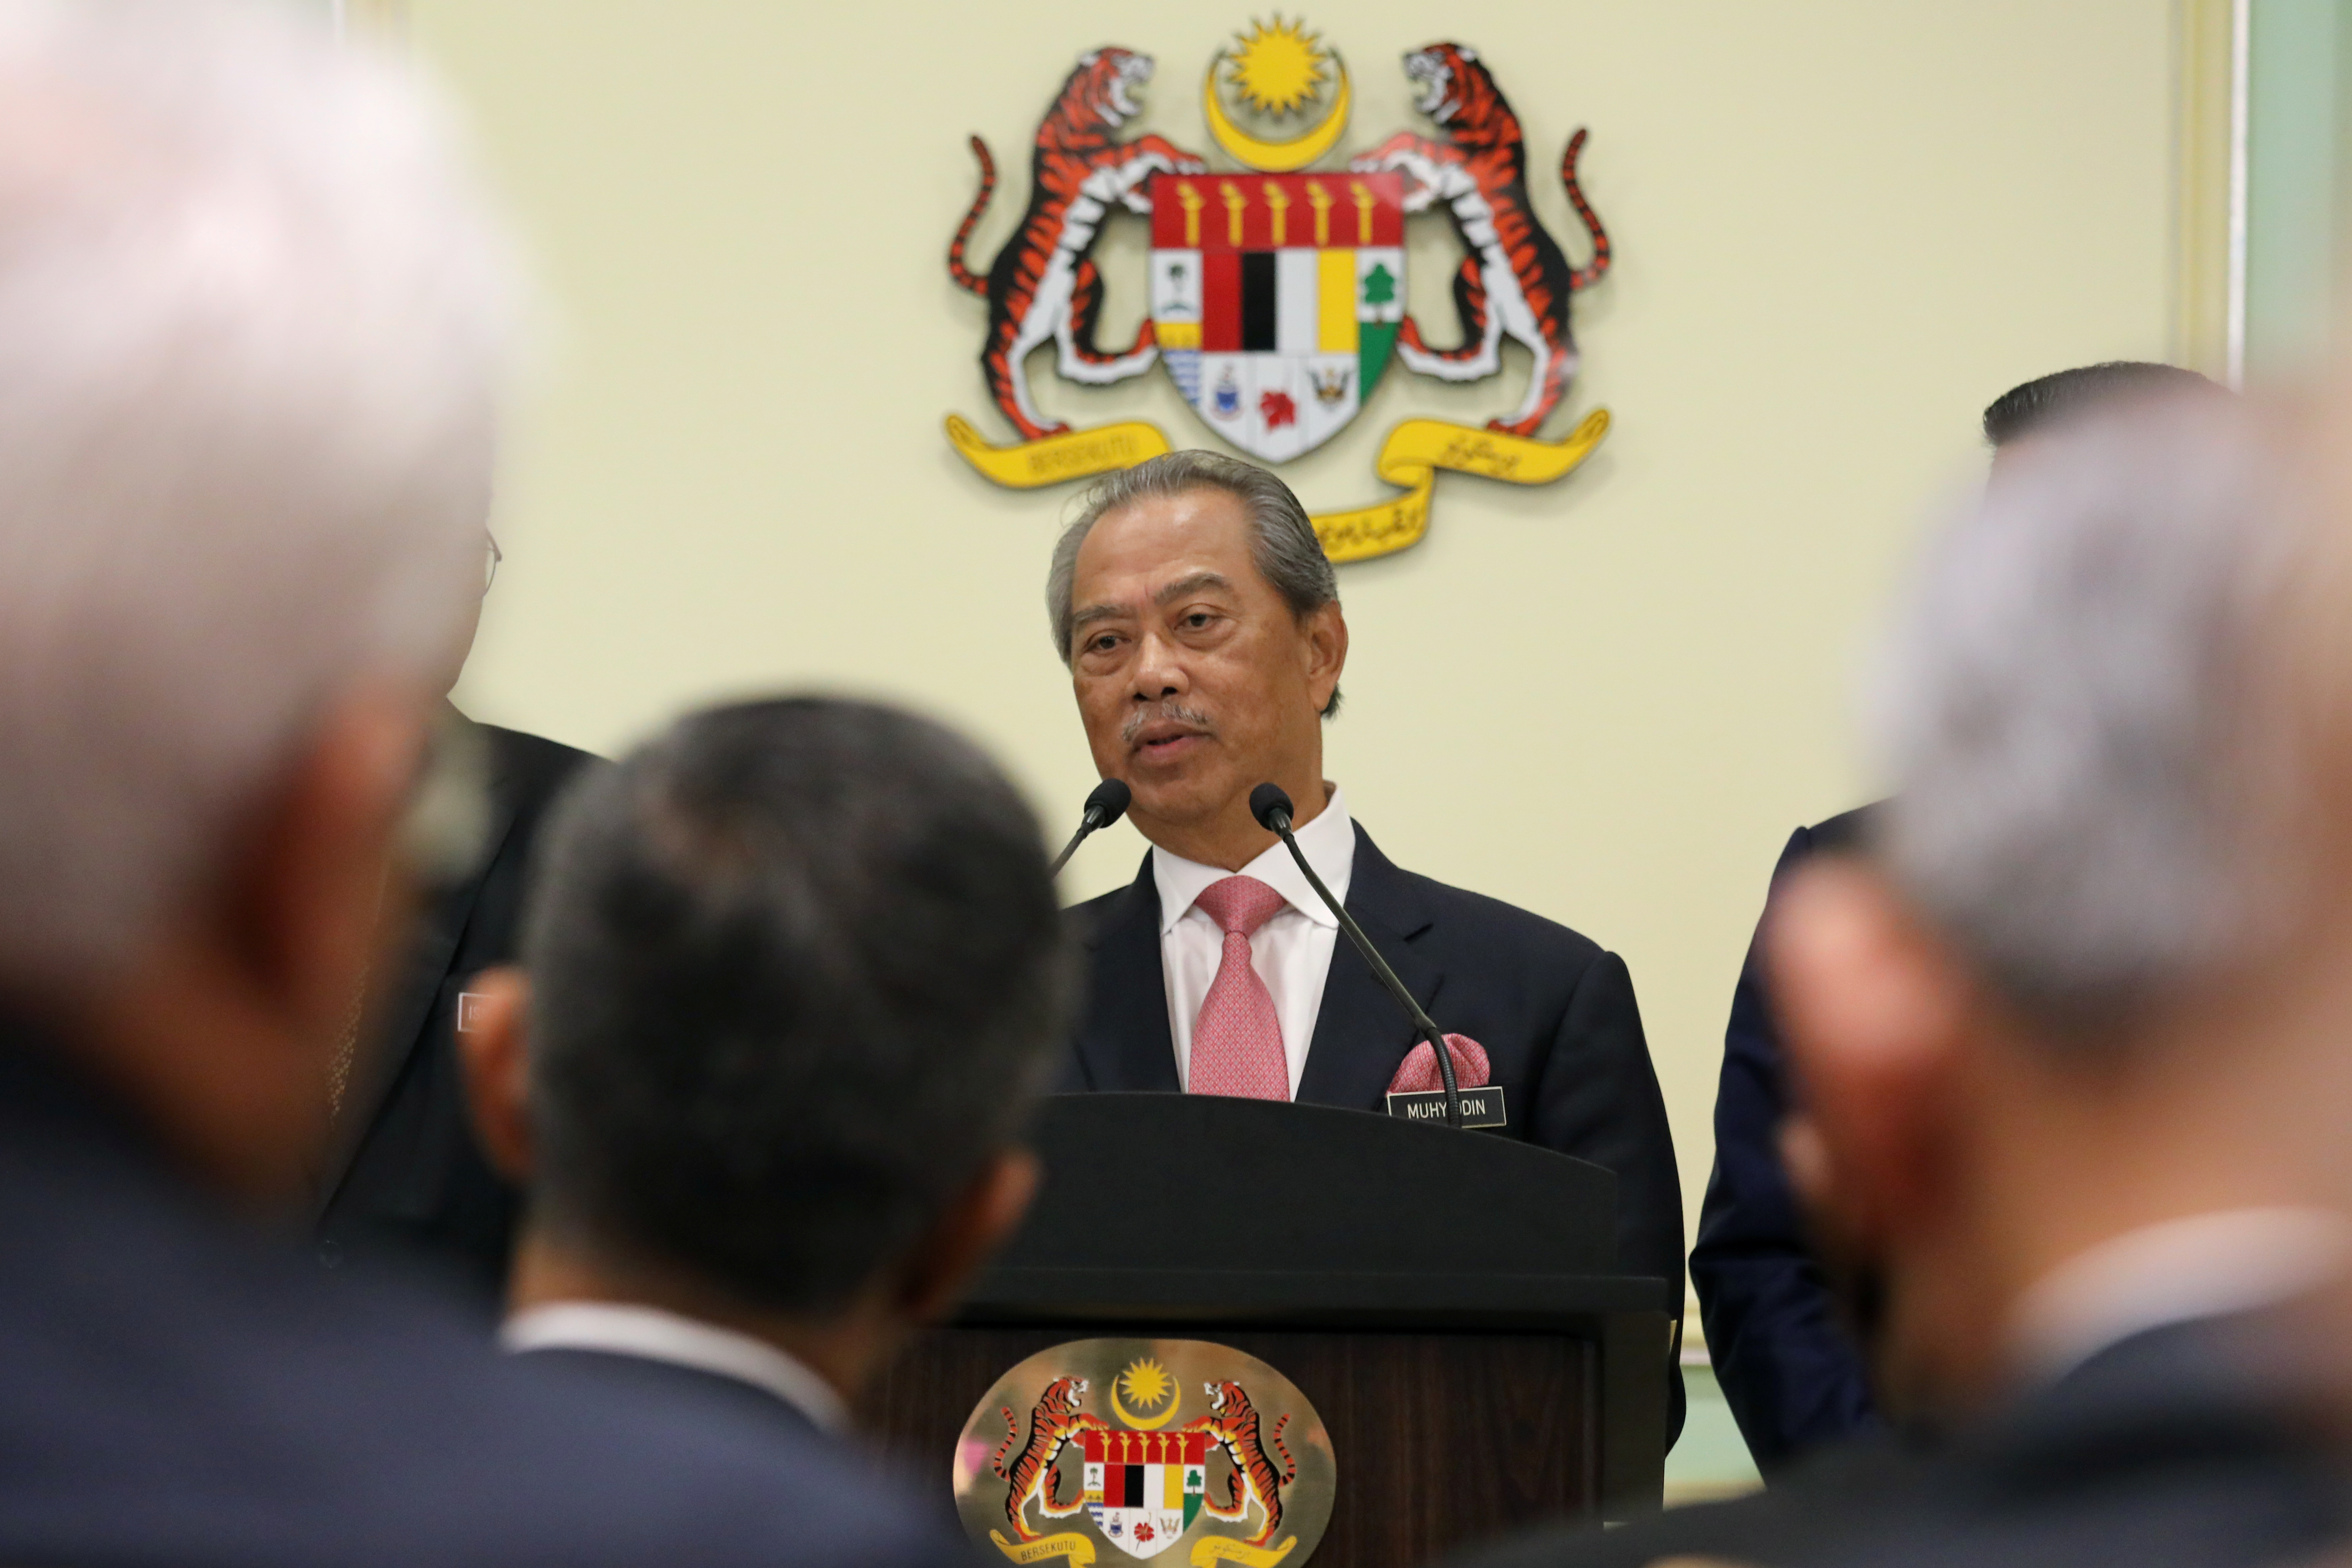 Malaysia's Prime Minister Muhyiddin Yassin speaks during a news conference in Putrajaya